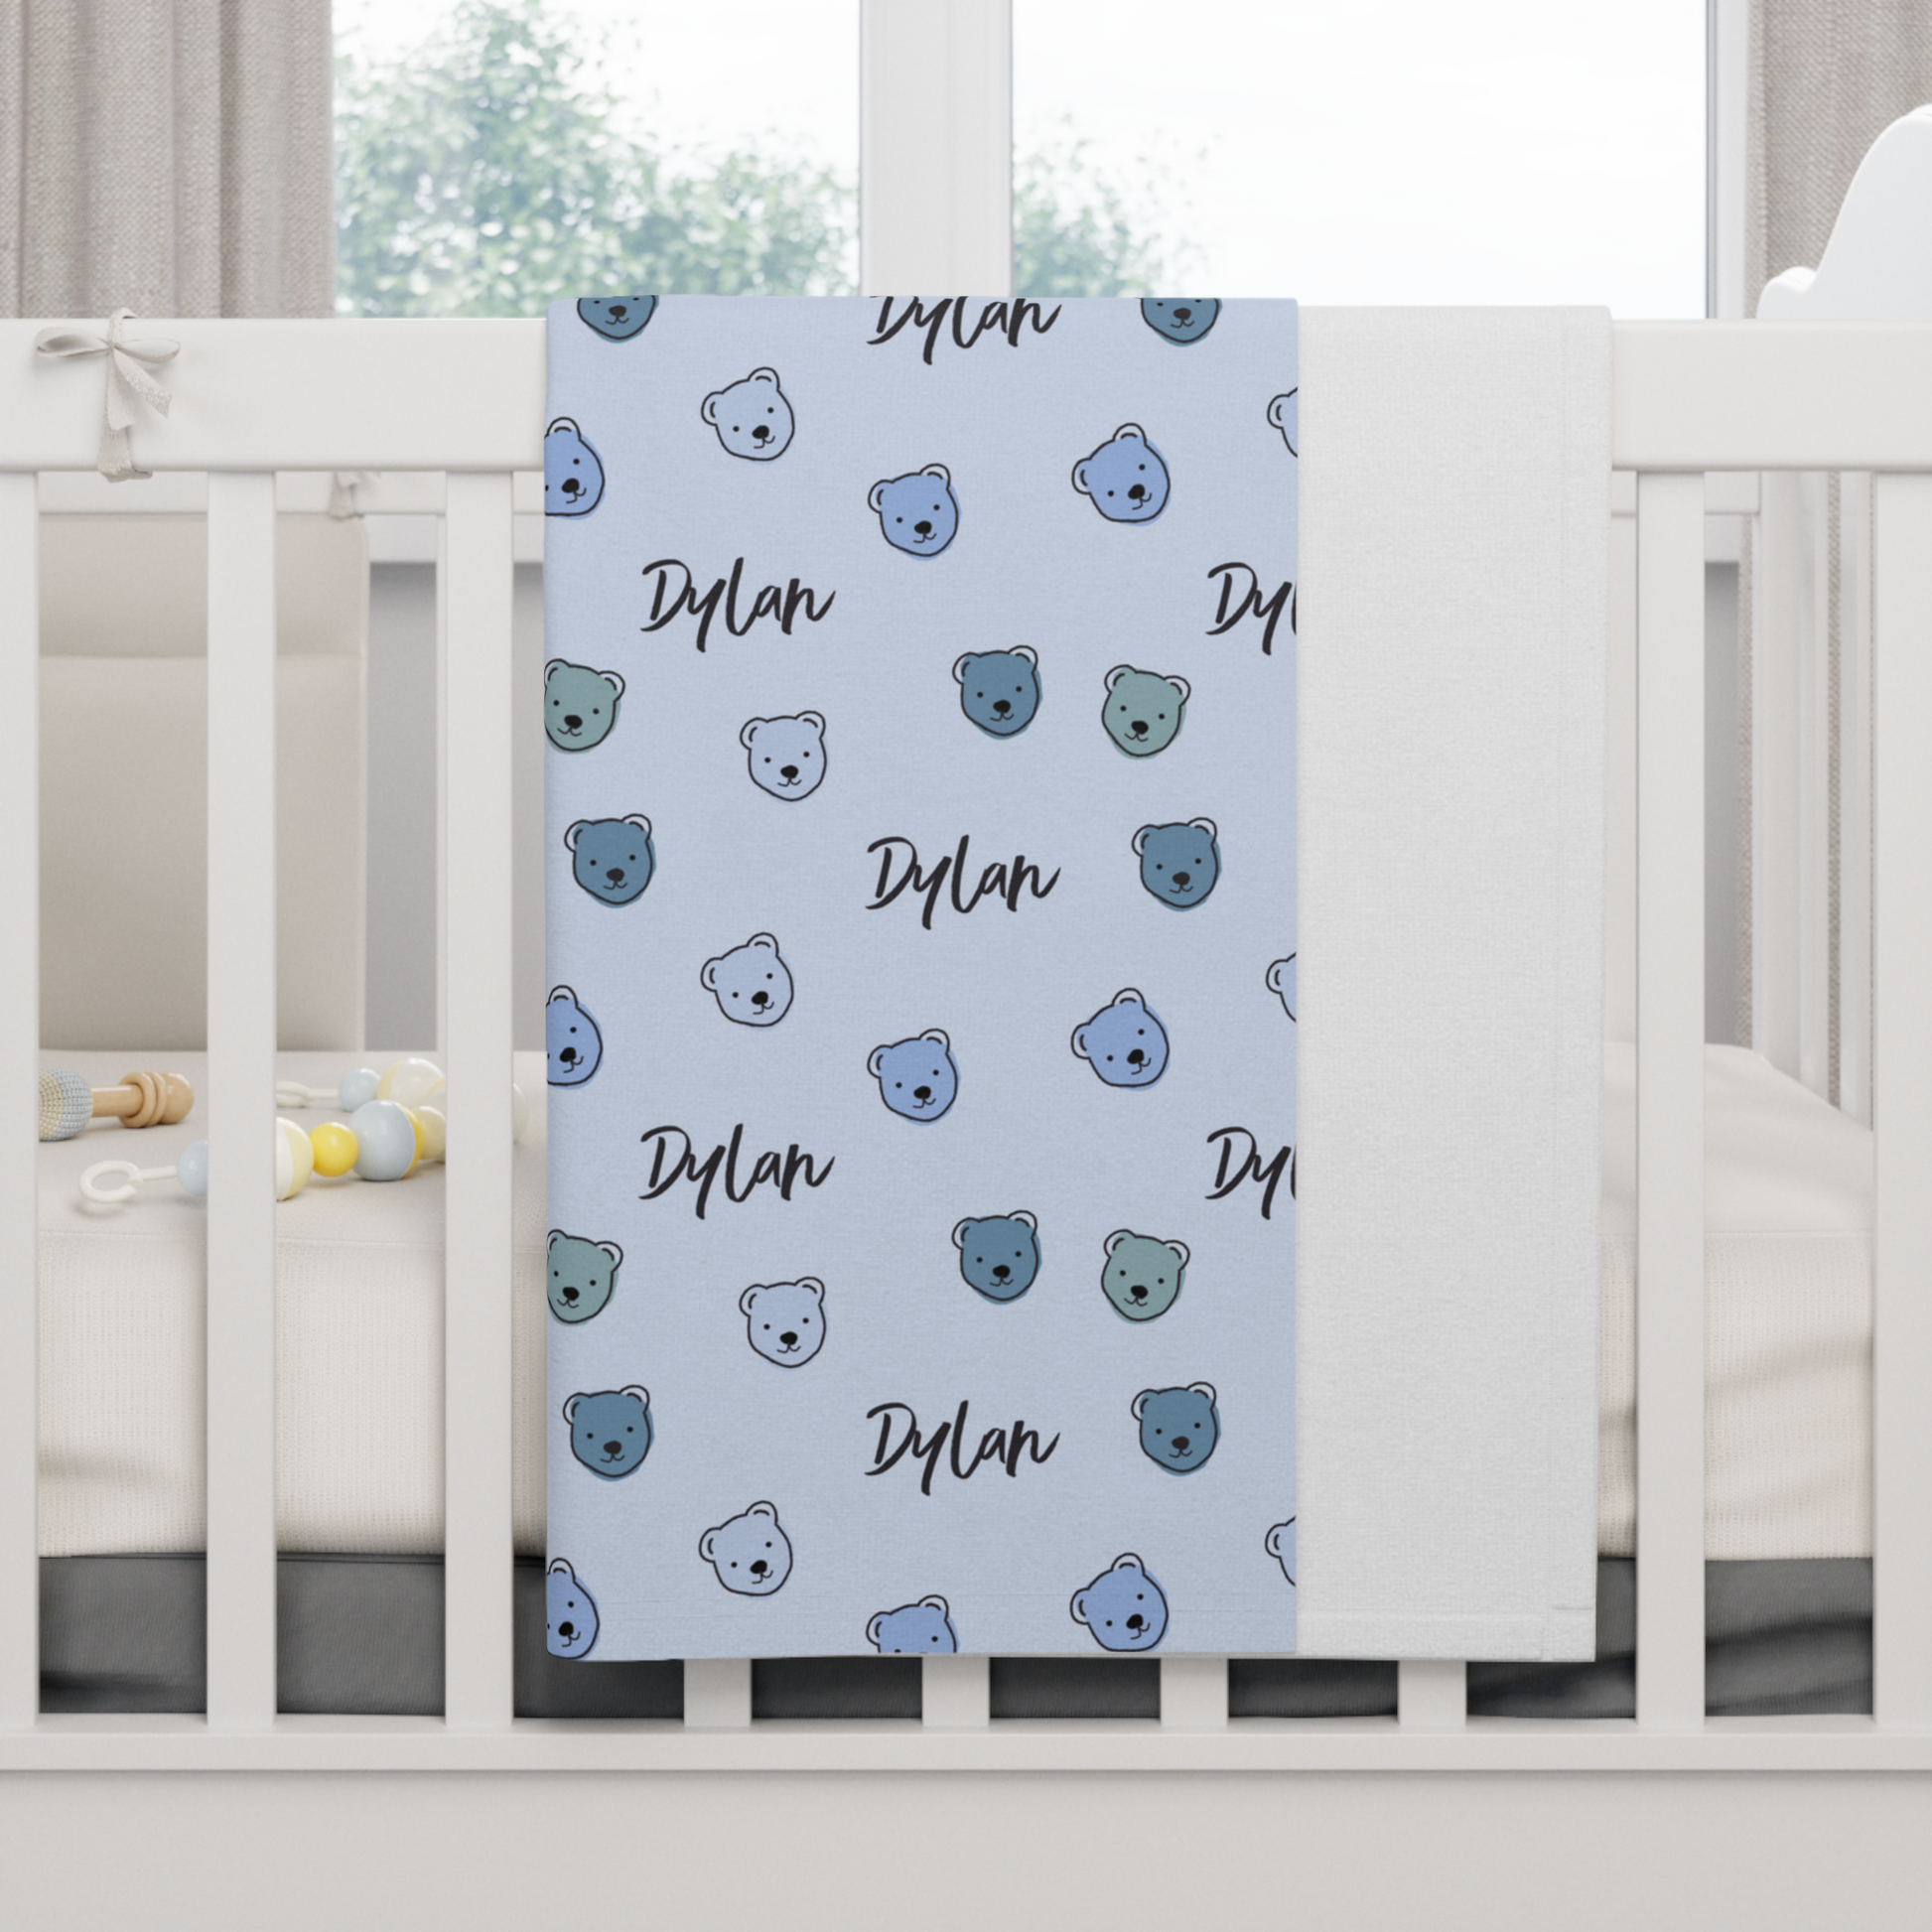 Fleece personalized baby blanket in blue cuddly bear pattern hung over side of white crib with window in the background